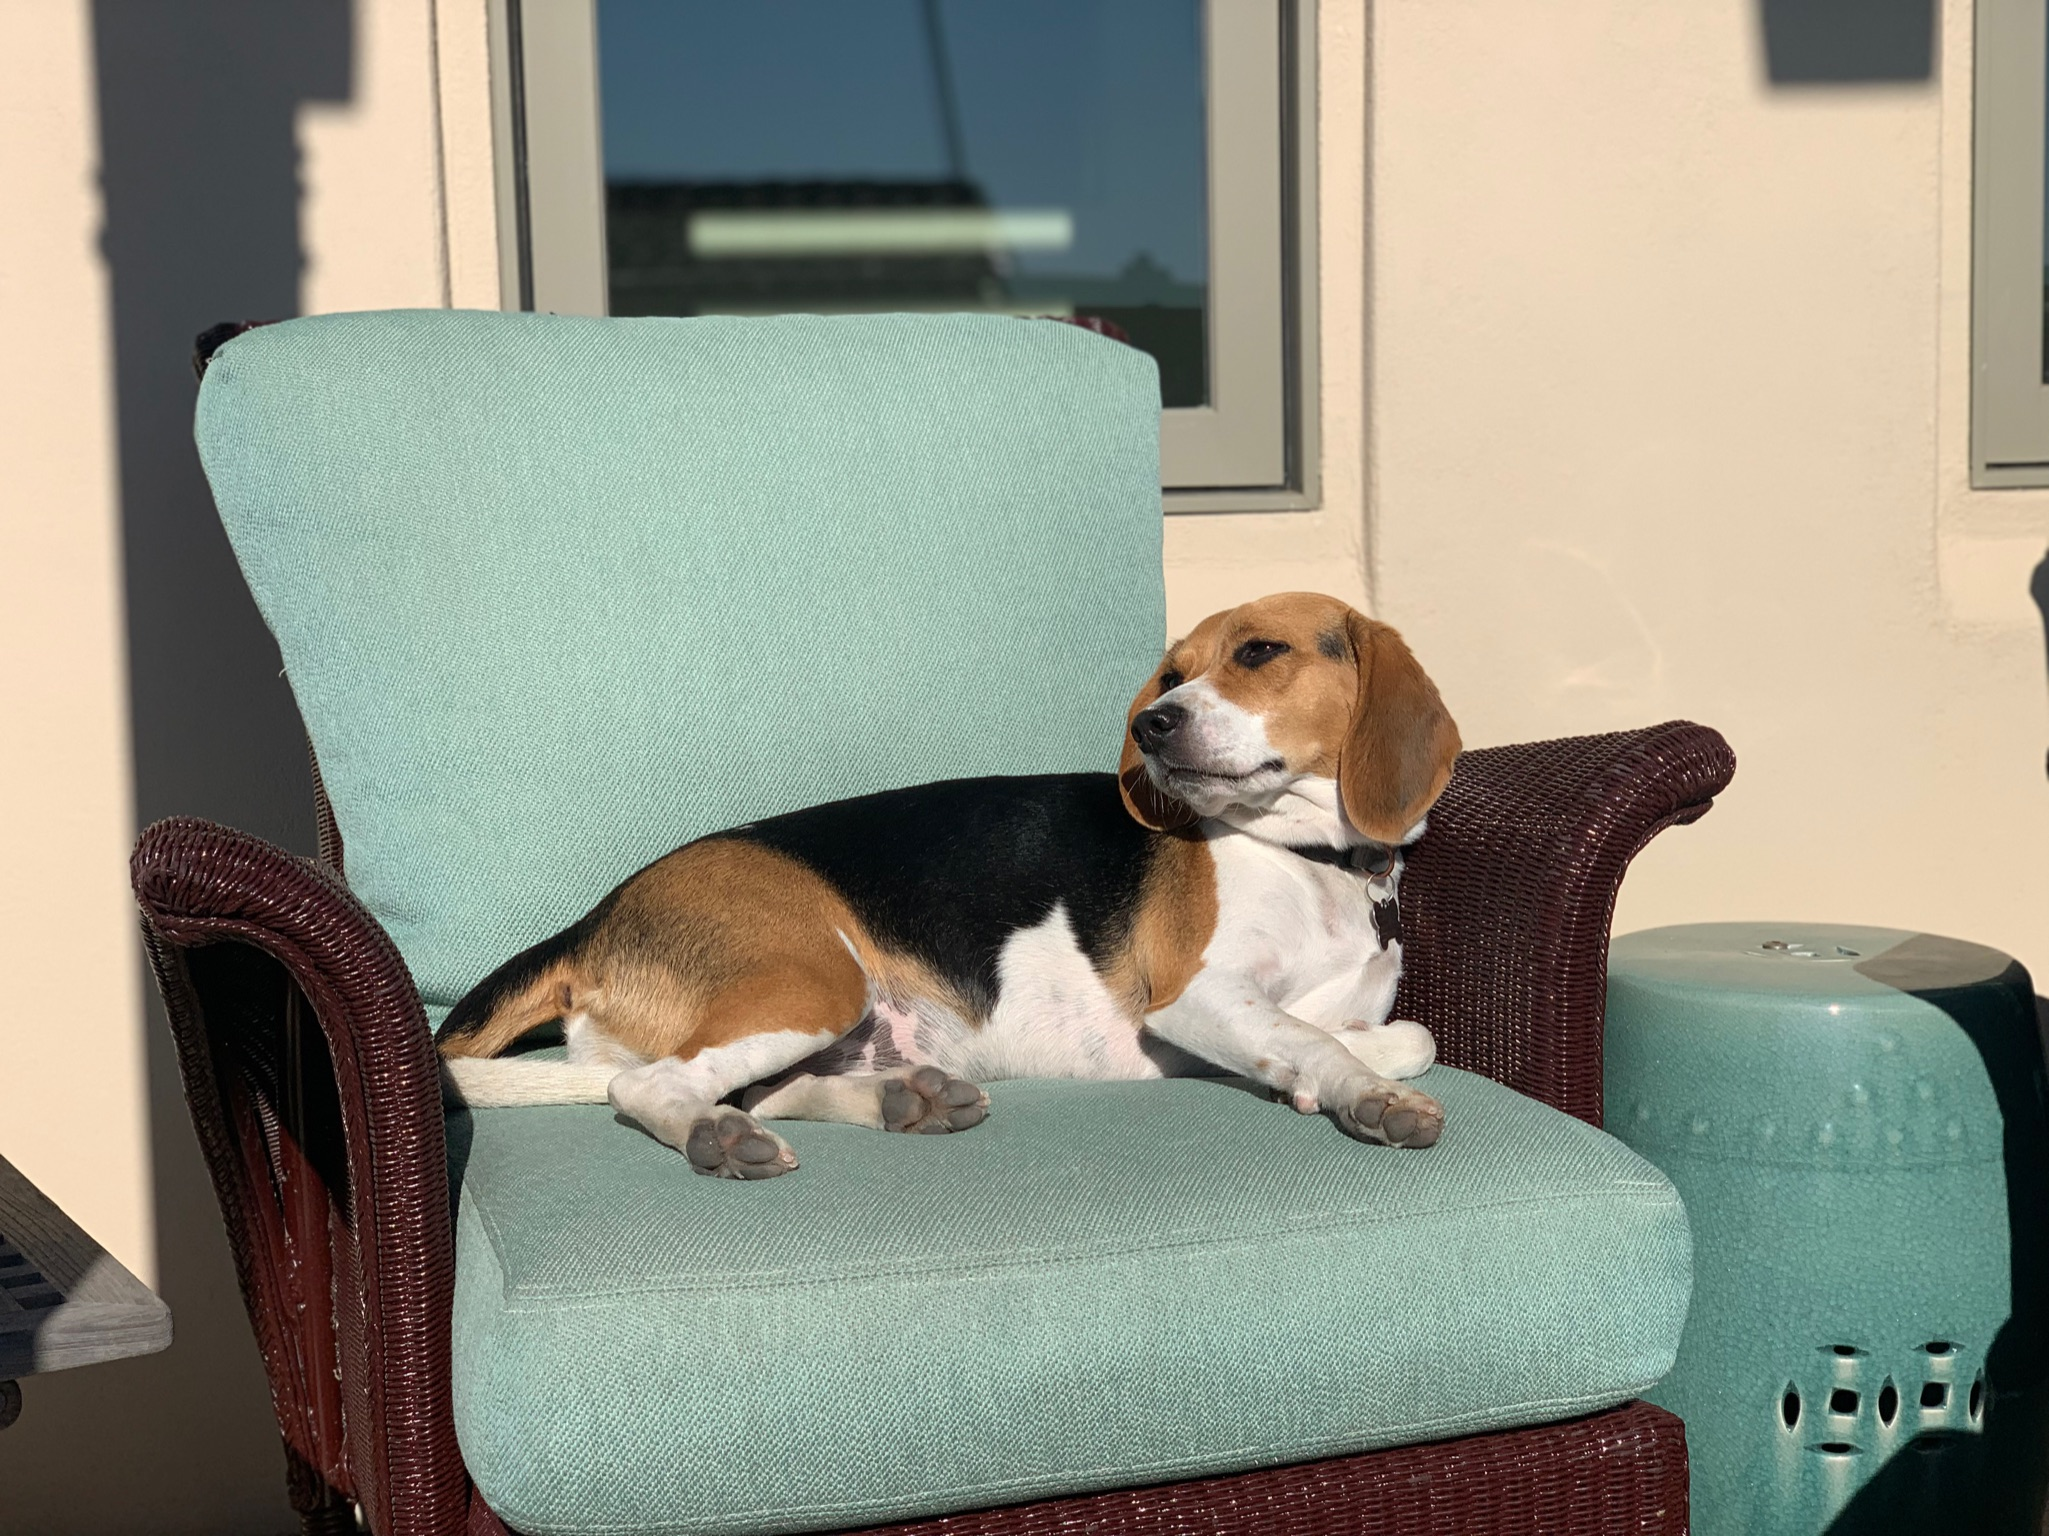 A beagle's gas can smell bad